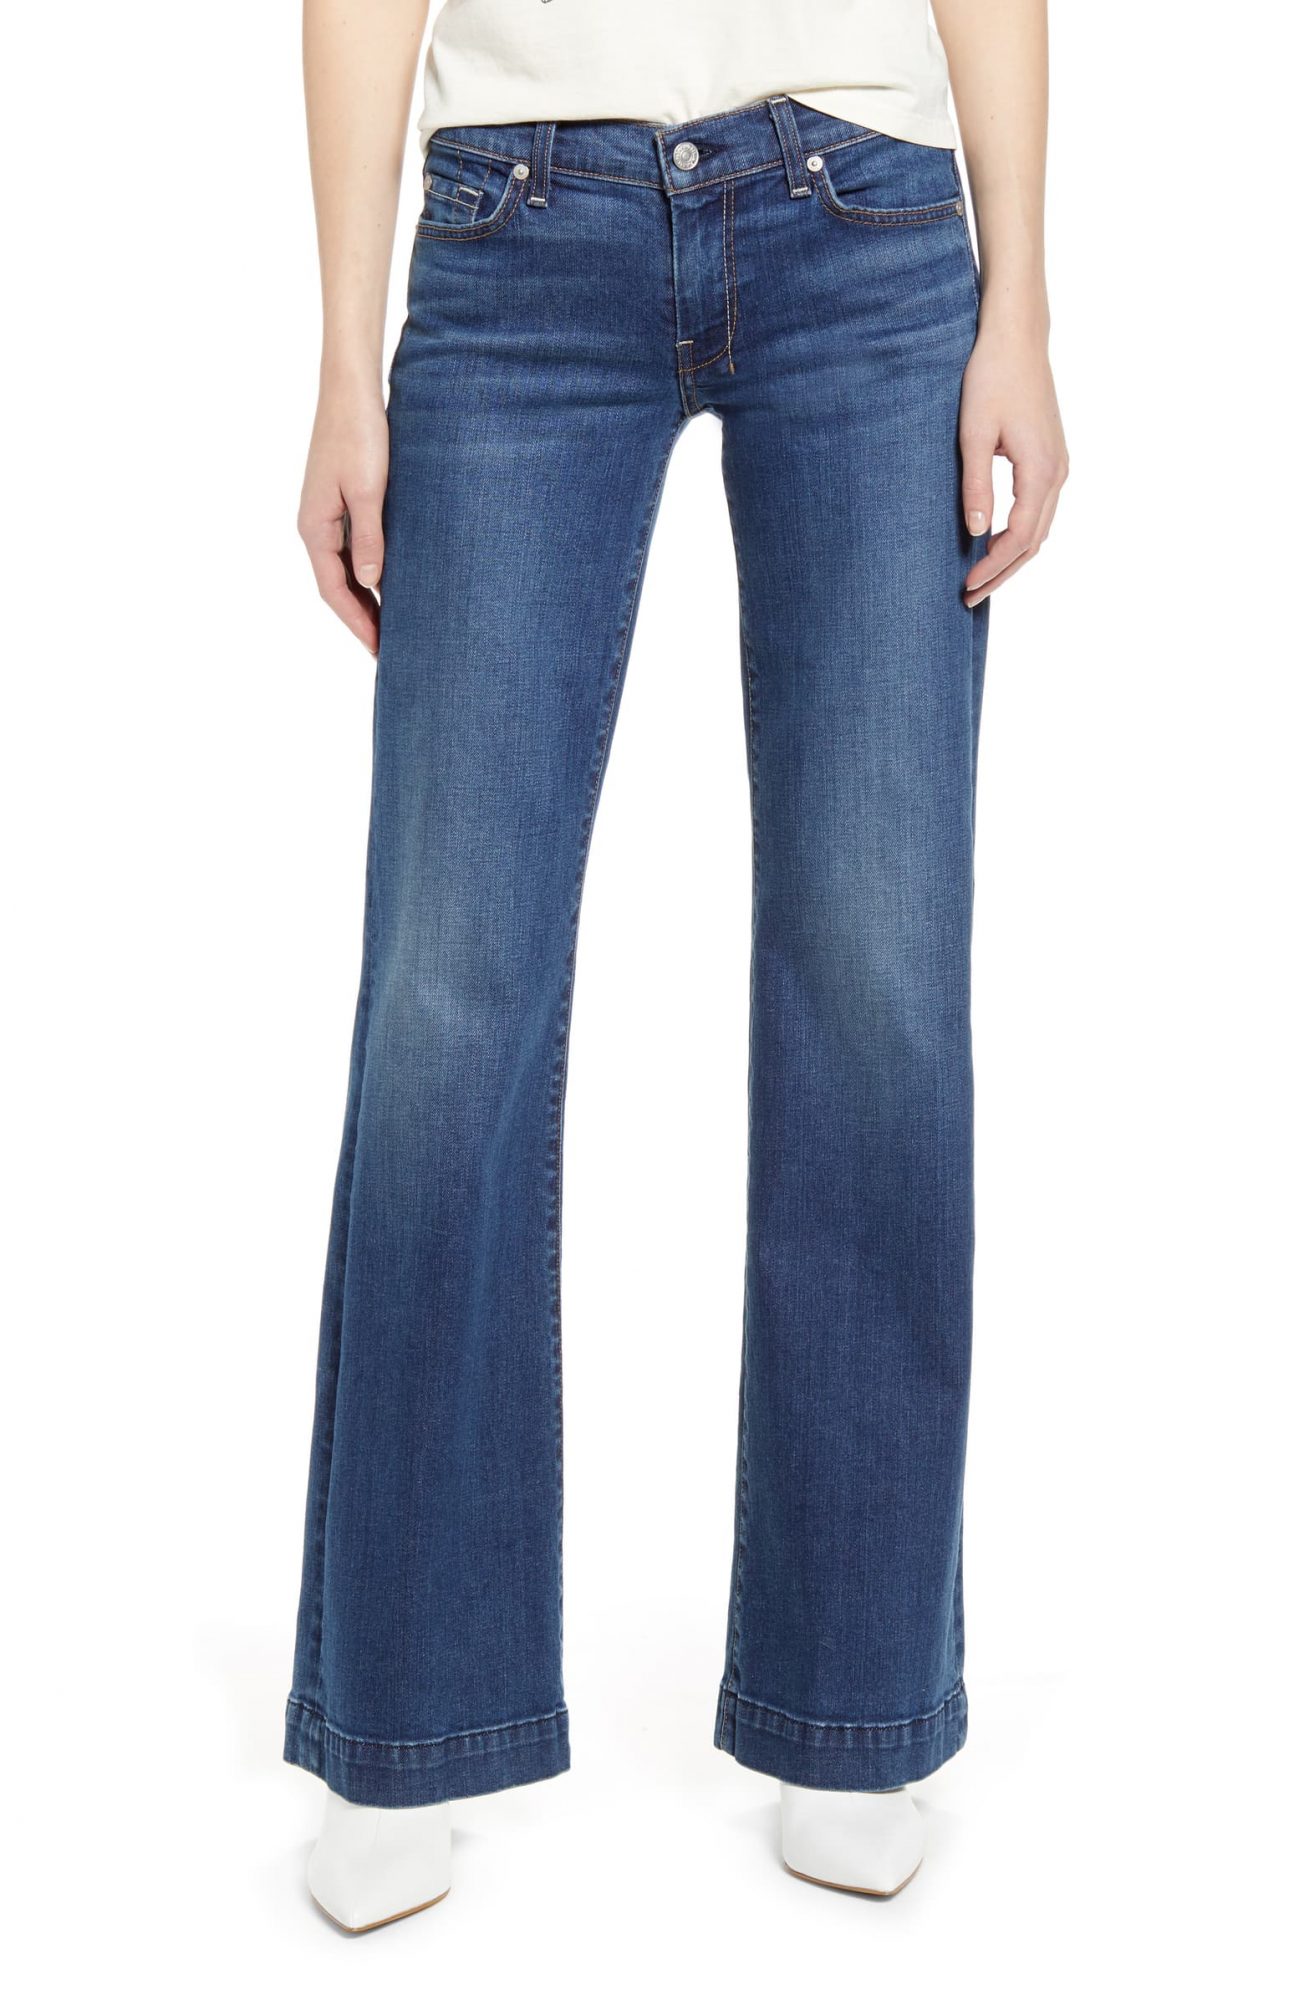 low-rise jeans